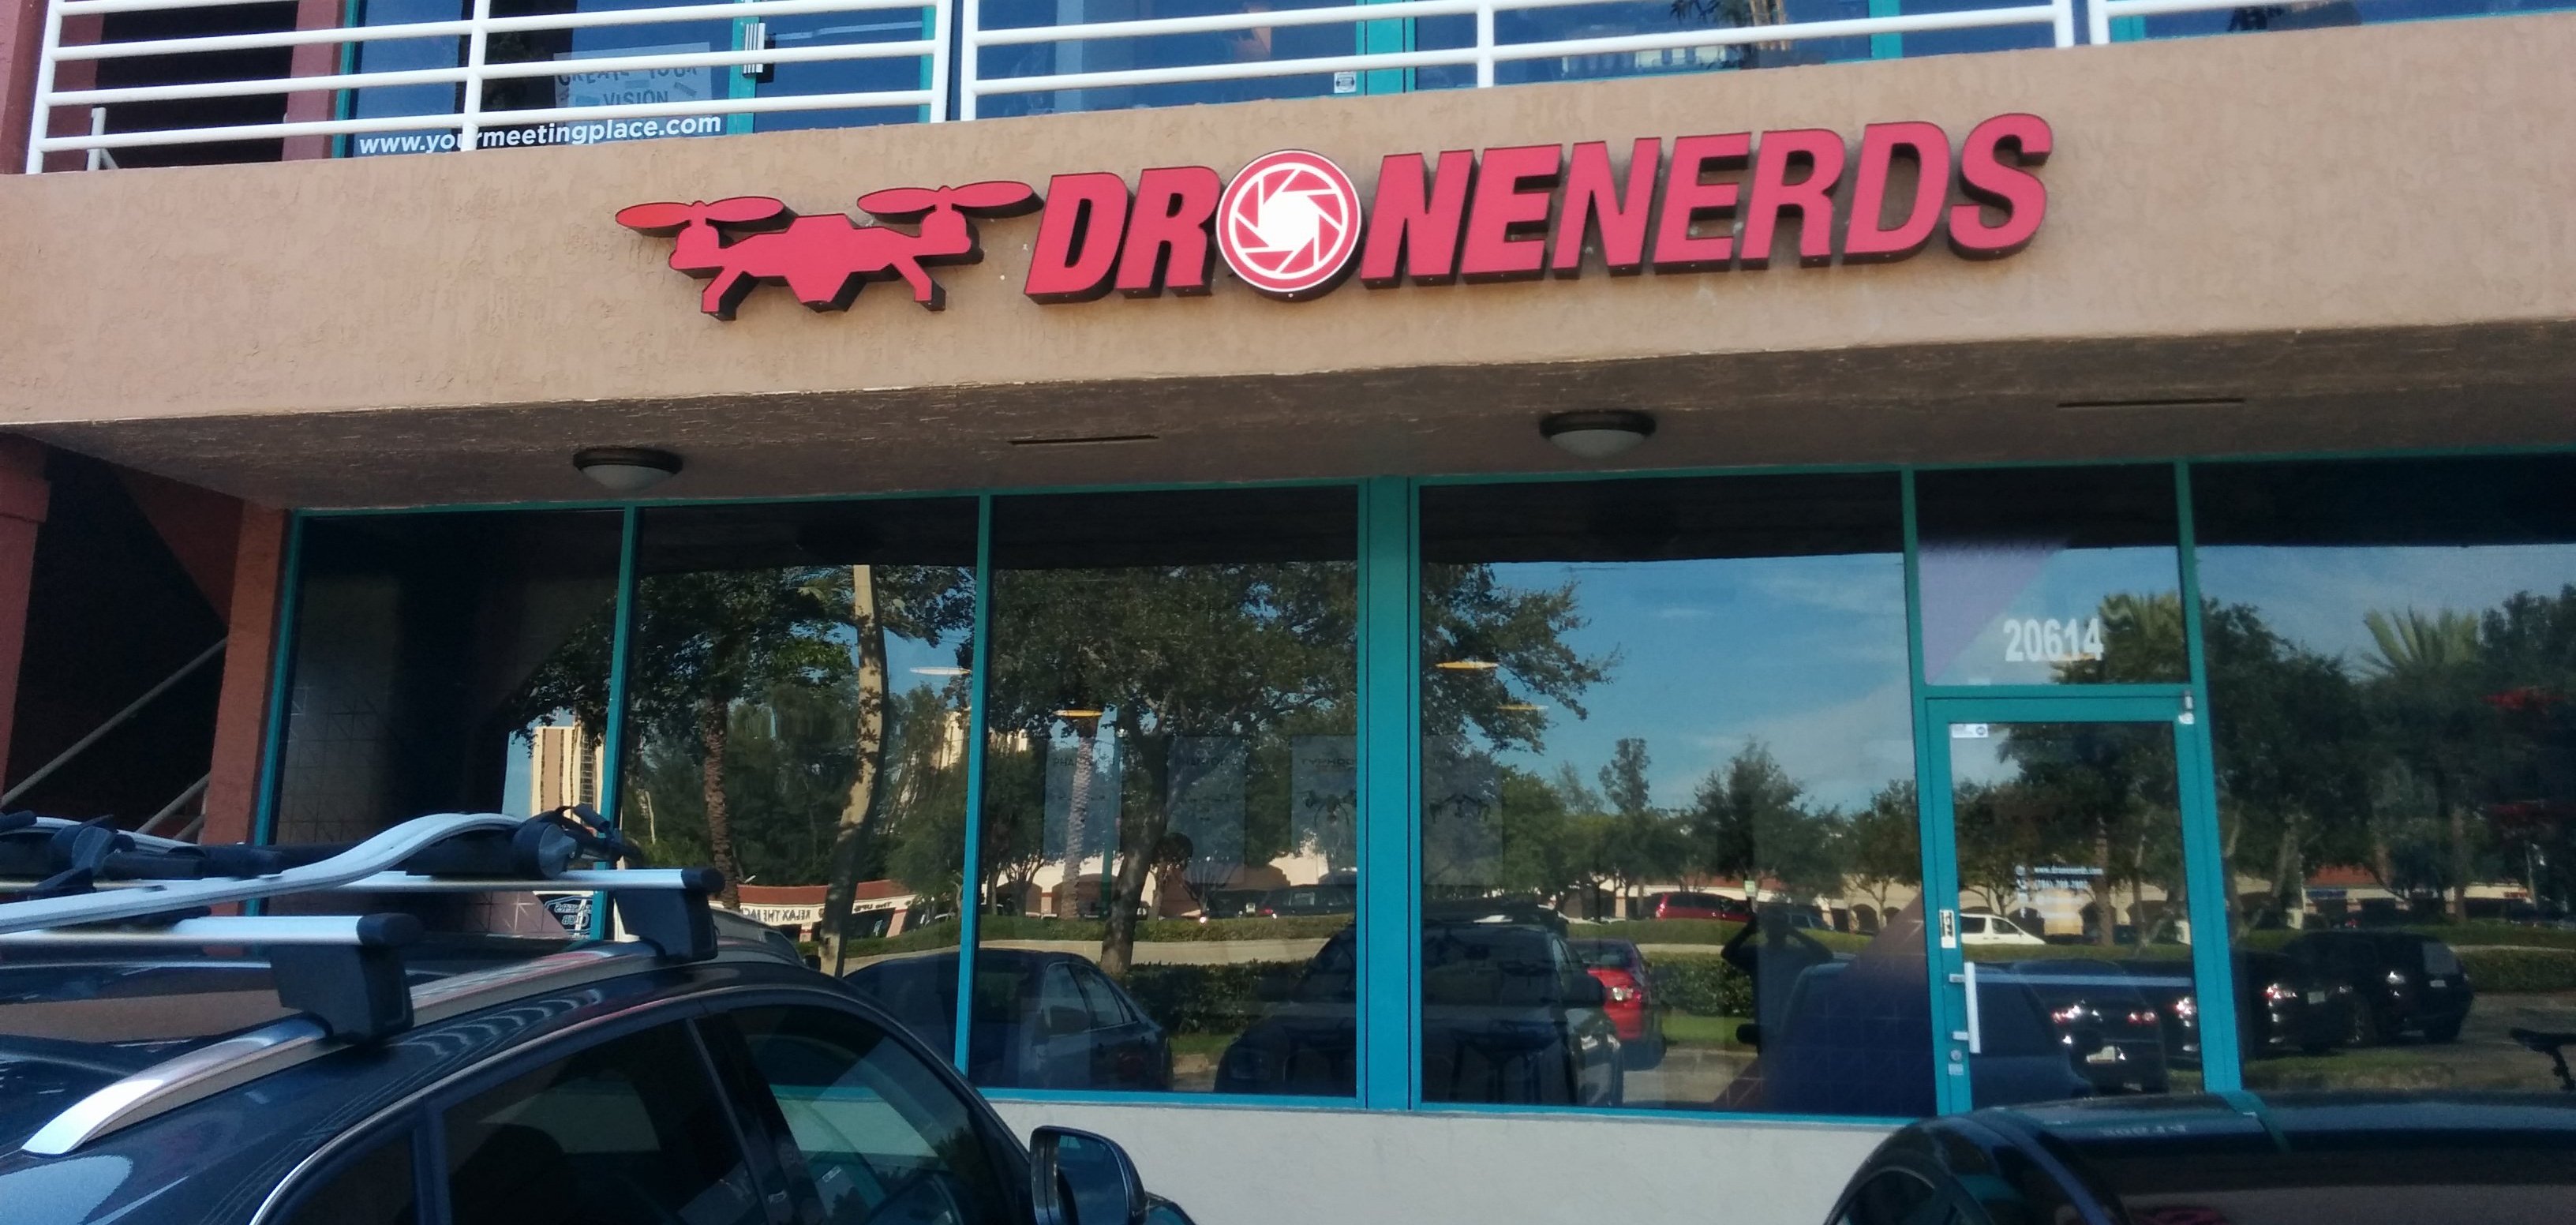 drone-nerds-storefront-cropped-1